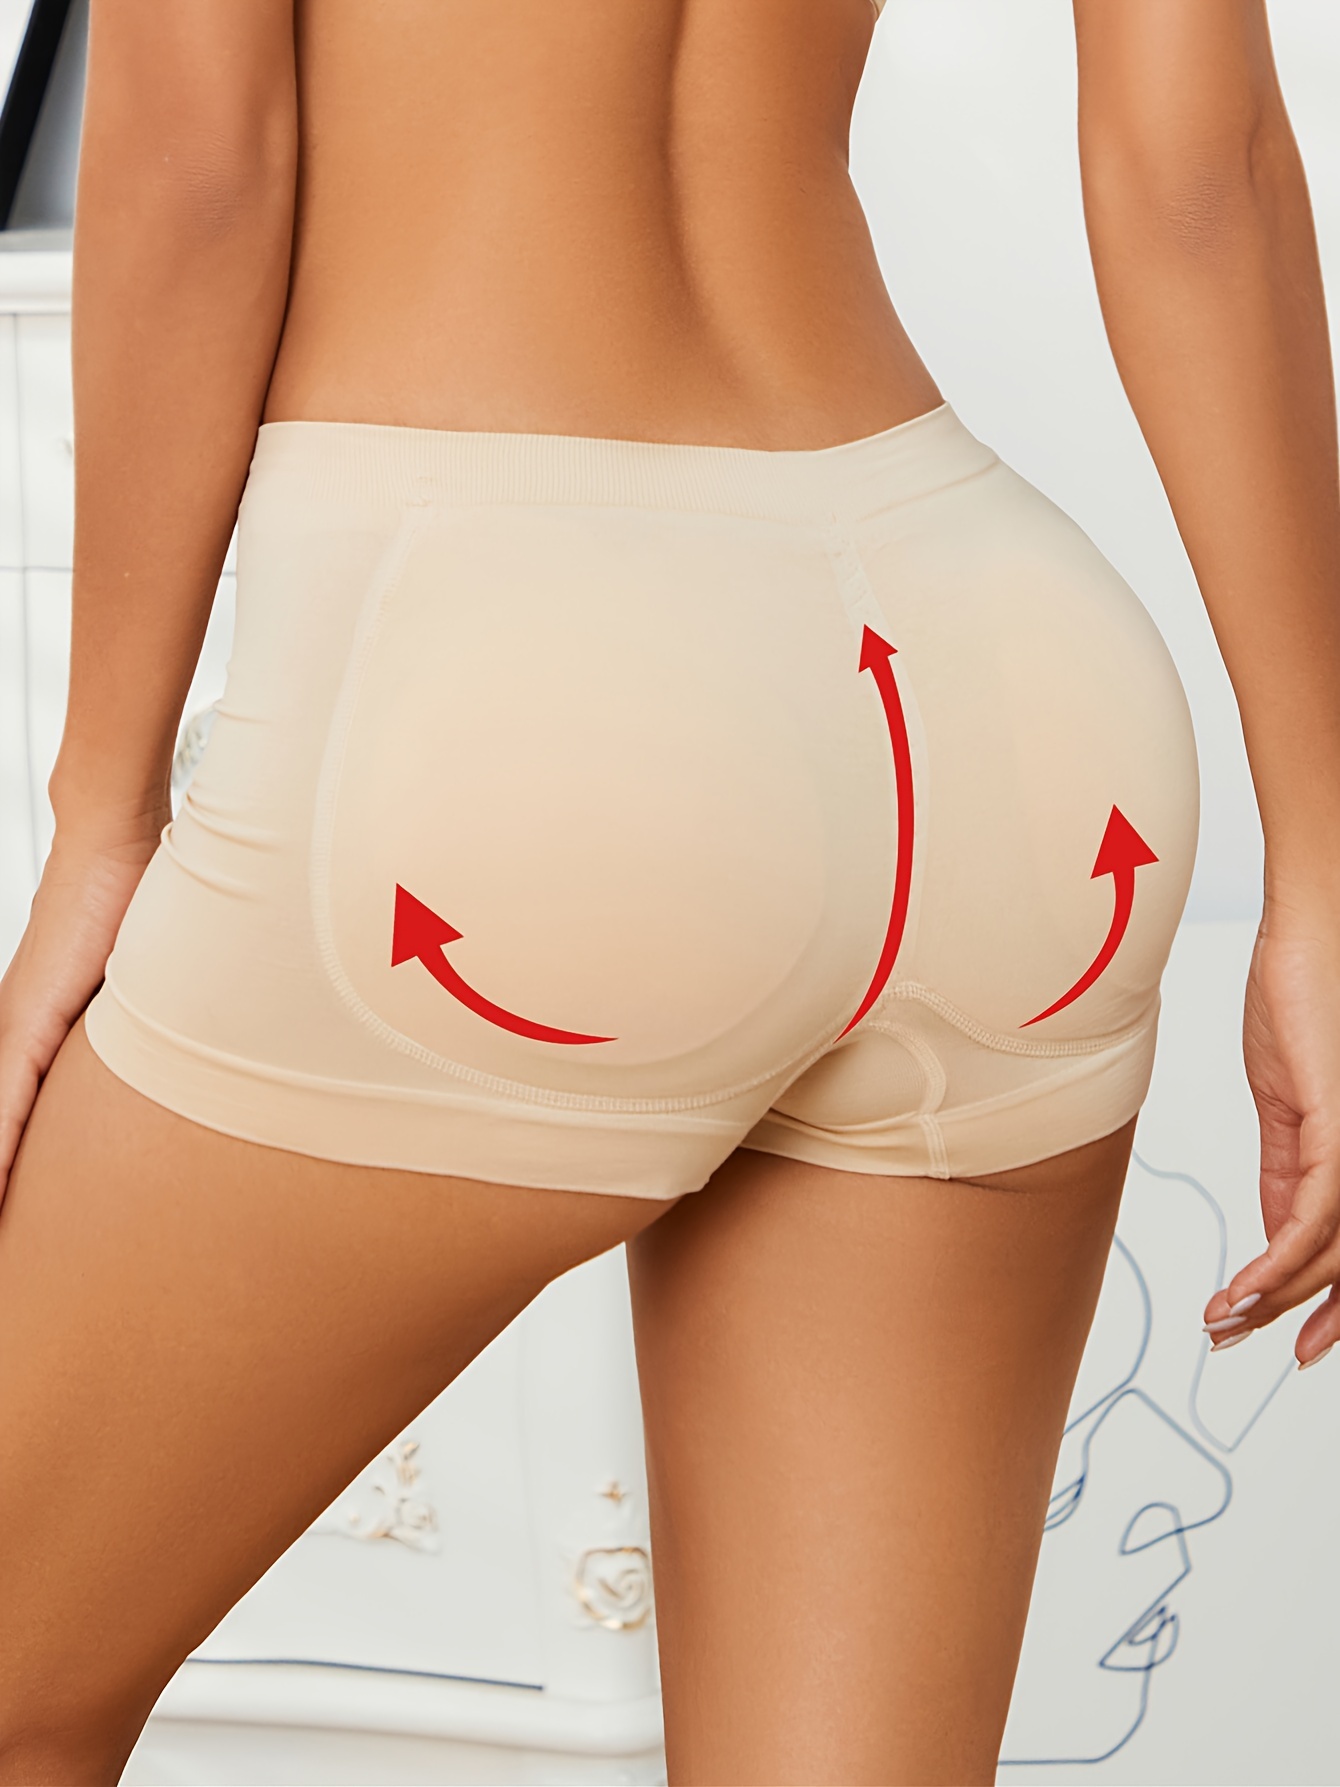 Comfy Butt Lifting Adjustable Shorts, Breathable Stretchy Solid Boyshort  Panties, Women's Lingerie & Underwear